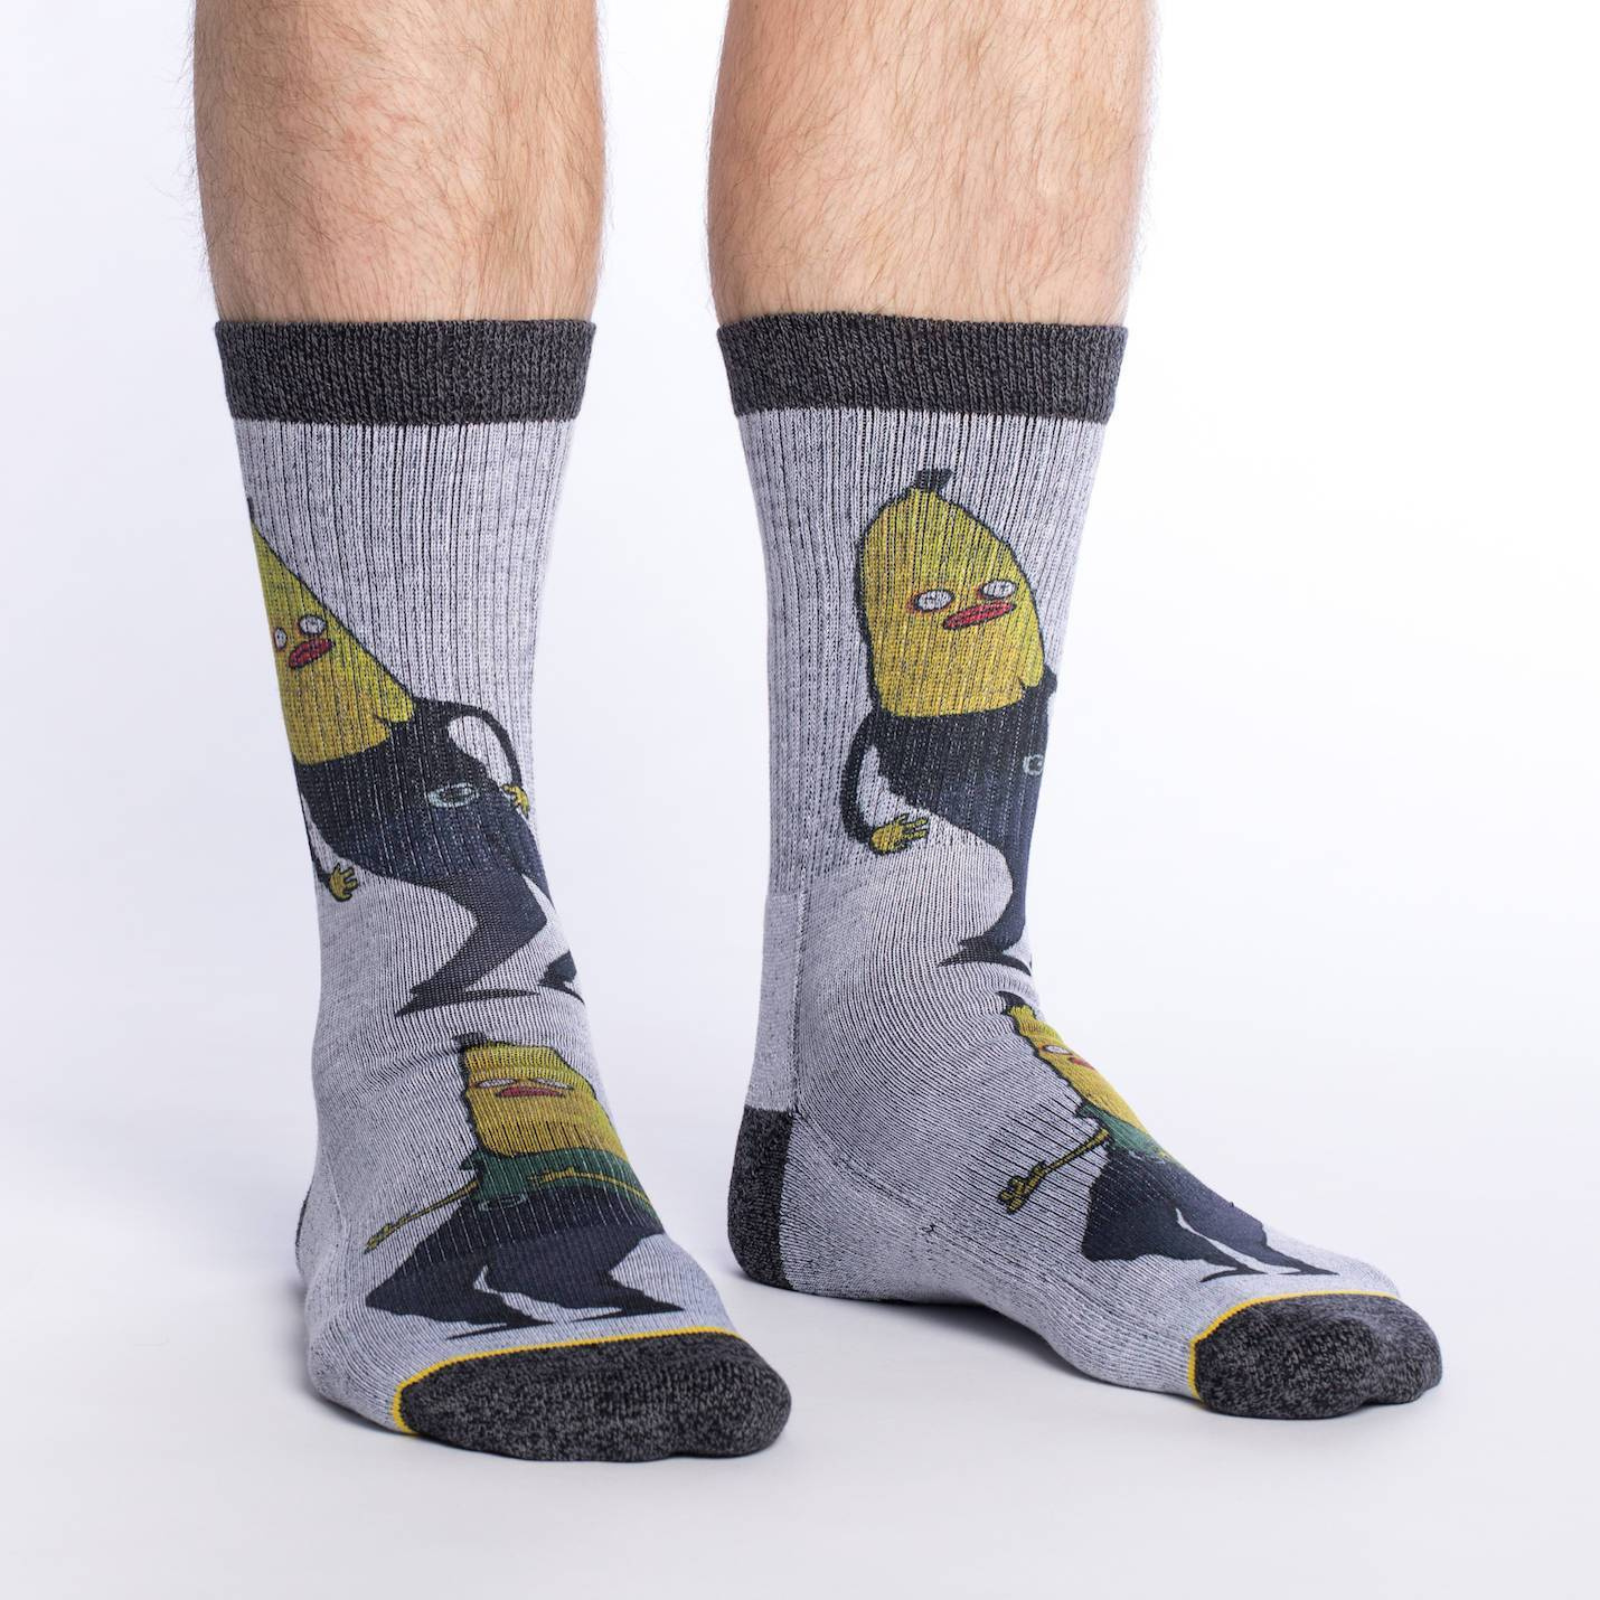 Good Luck Sock men's gray crew sock with a Banana with face, legs and arms dancing displayed on male model